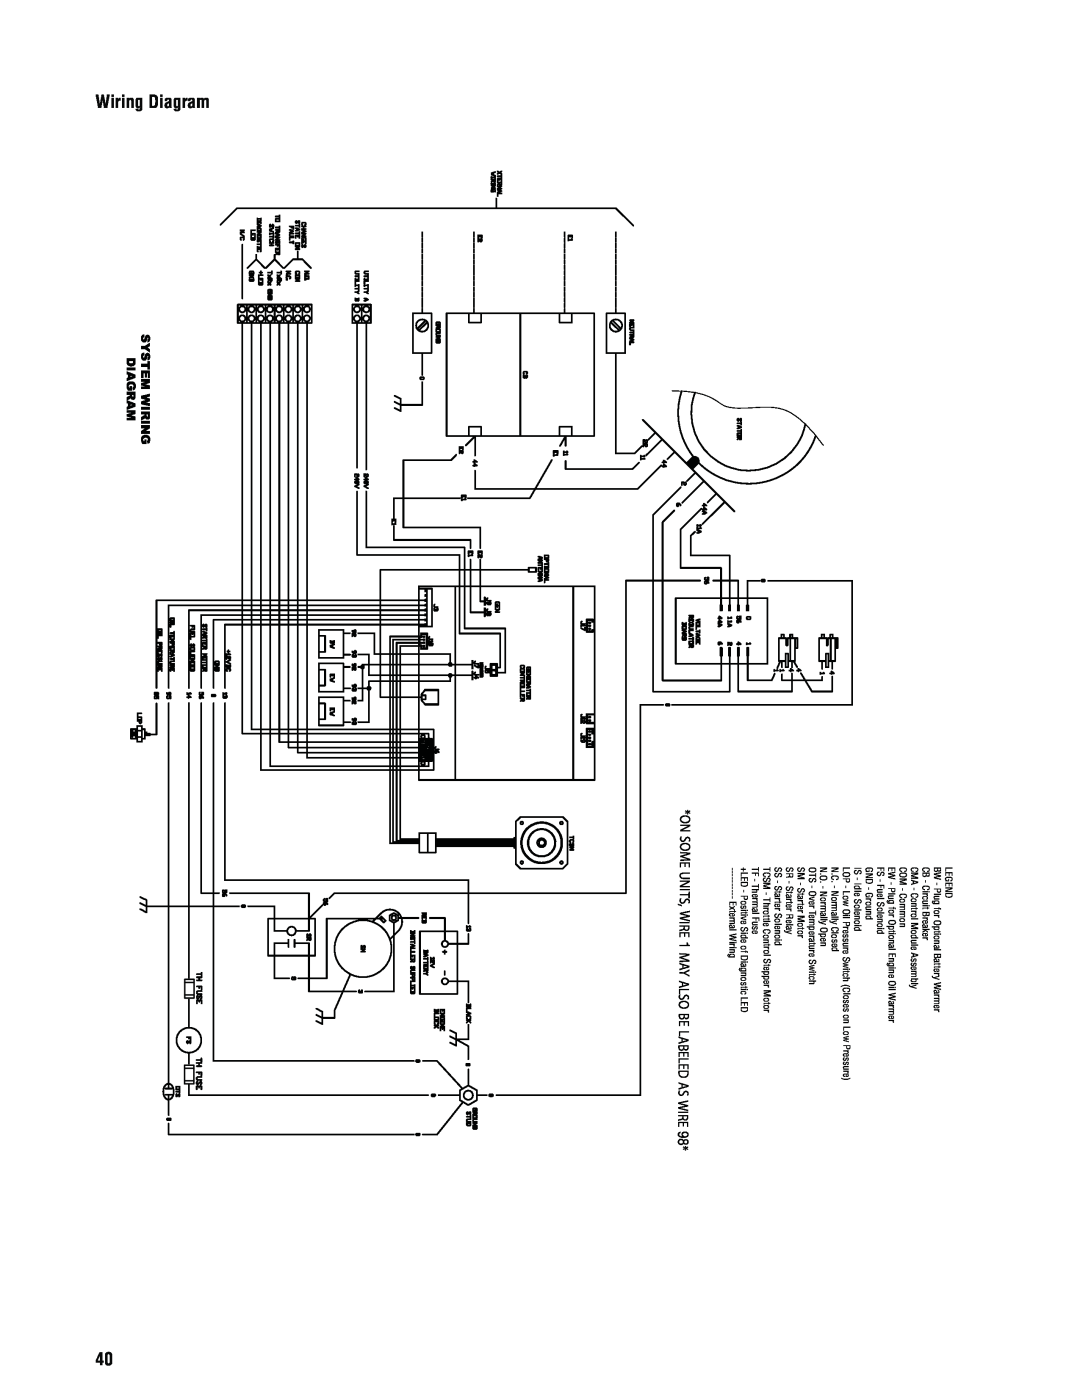 Rheem GEN20AD-E, GEN16AD-E, GEN15ADC-E installation manual Wiring Diagram, ON SOME UNITS, WIRE 1 MAY ALSO BE LABELED AS WIRE 